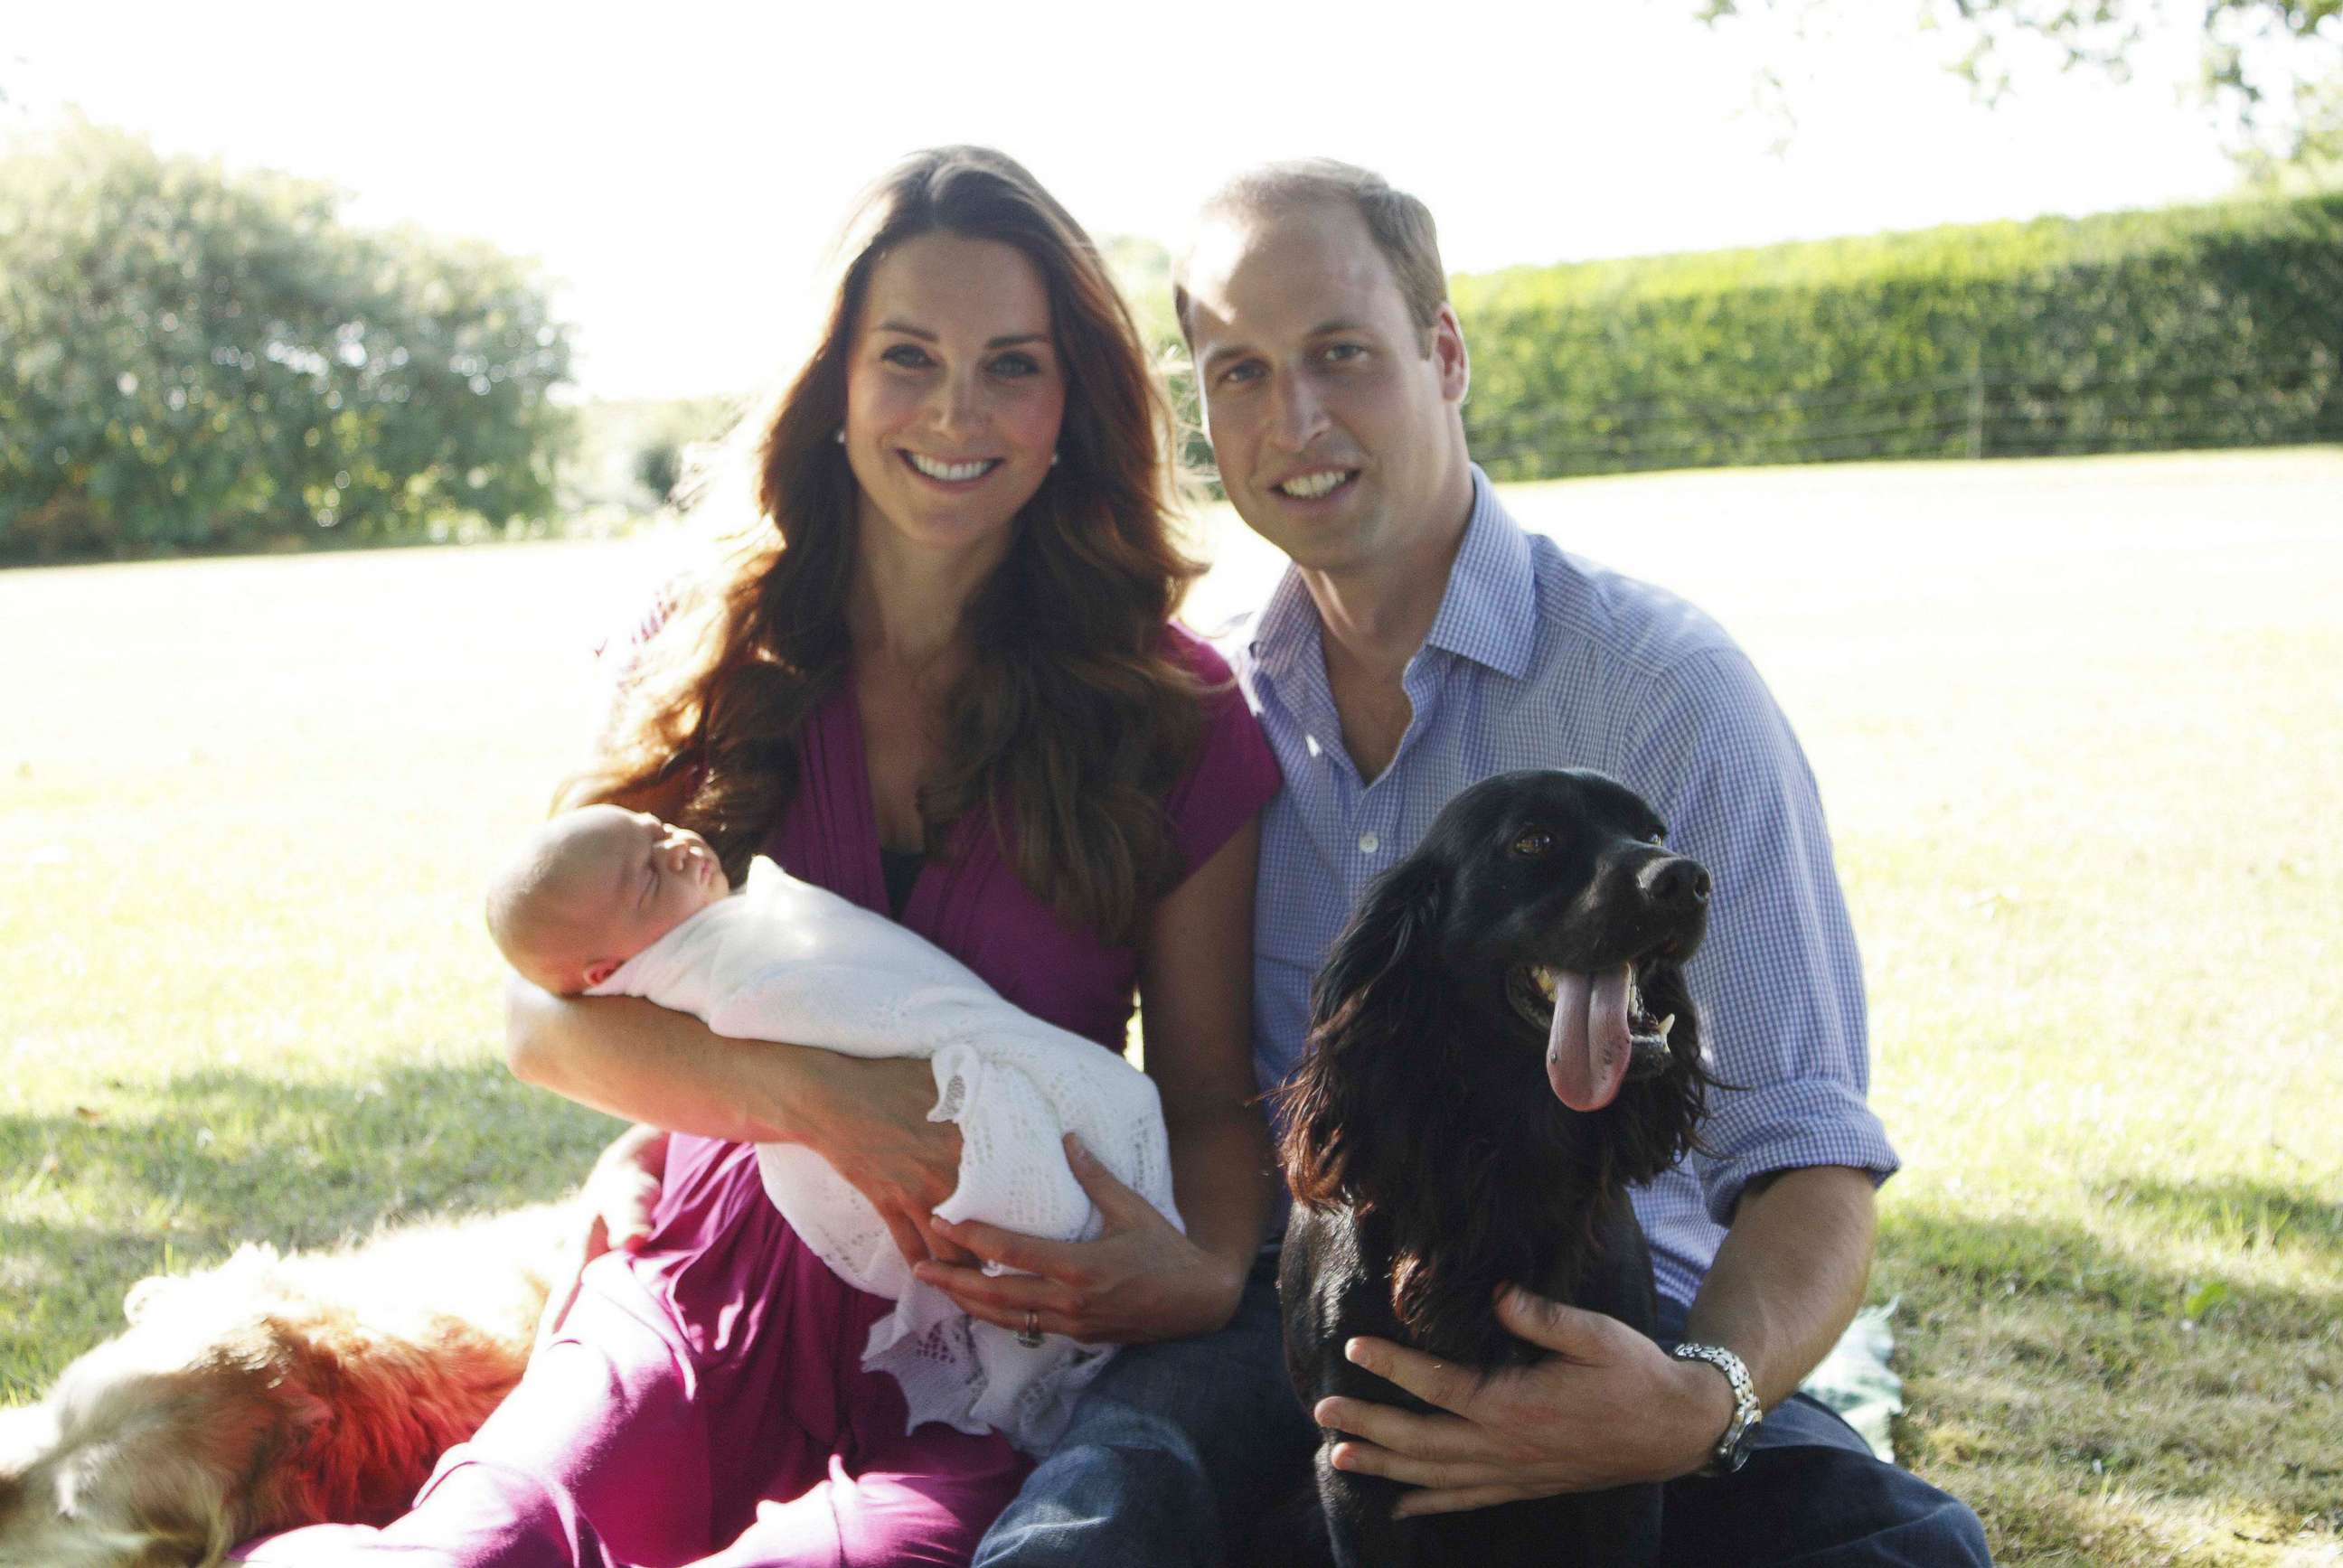 PHOTO: Prince William and Catherine, Duchess of Cambridge, pose in the garden of the Middleton family home in Bucklebury, southern England, with their son Prince George and cocker spaniel Lupo in this undated photograph released Aug. 19, 2013.